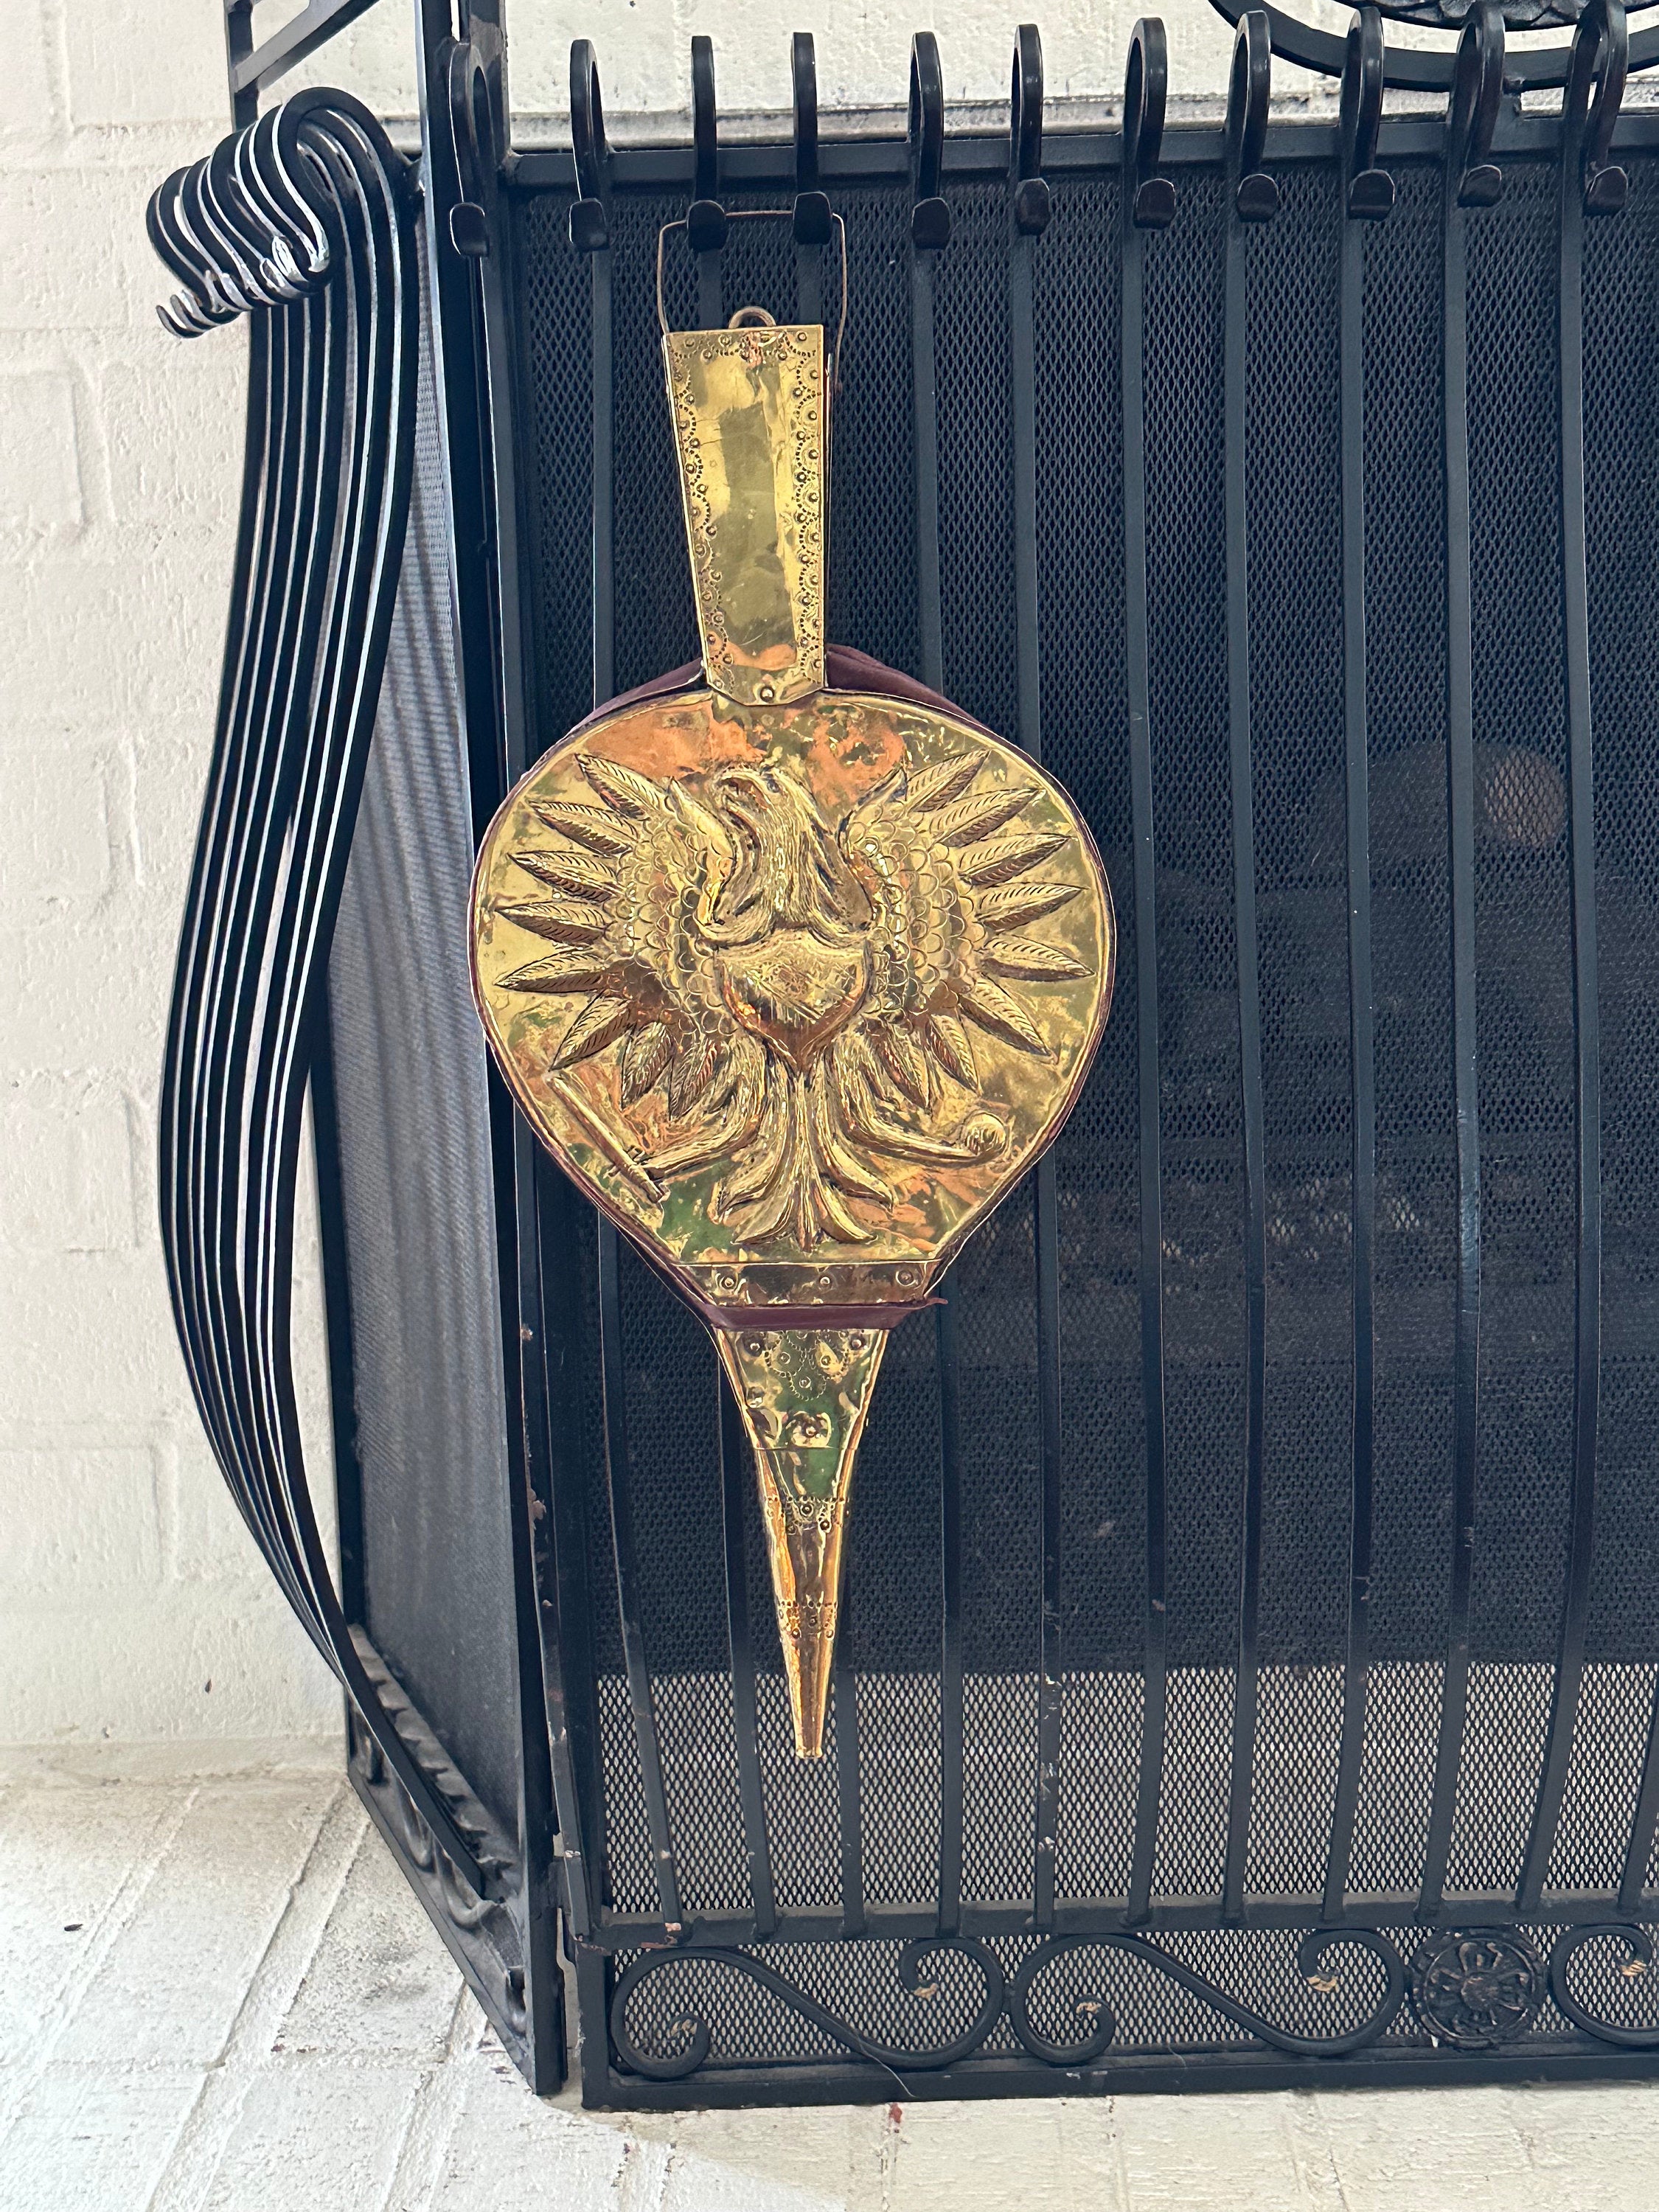 Vintage Brass and Leather Bellows with Eagle Design | Antique Rare Hand Hammered Fireplace Chimney Blower | Country Home Fireplace Decor